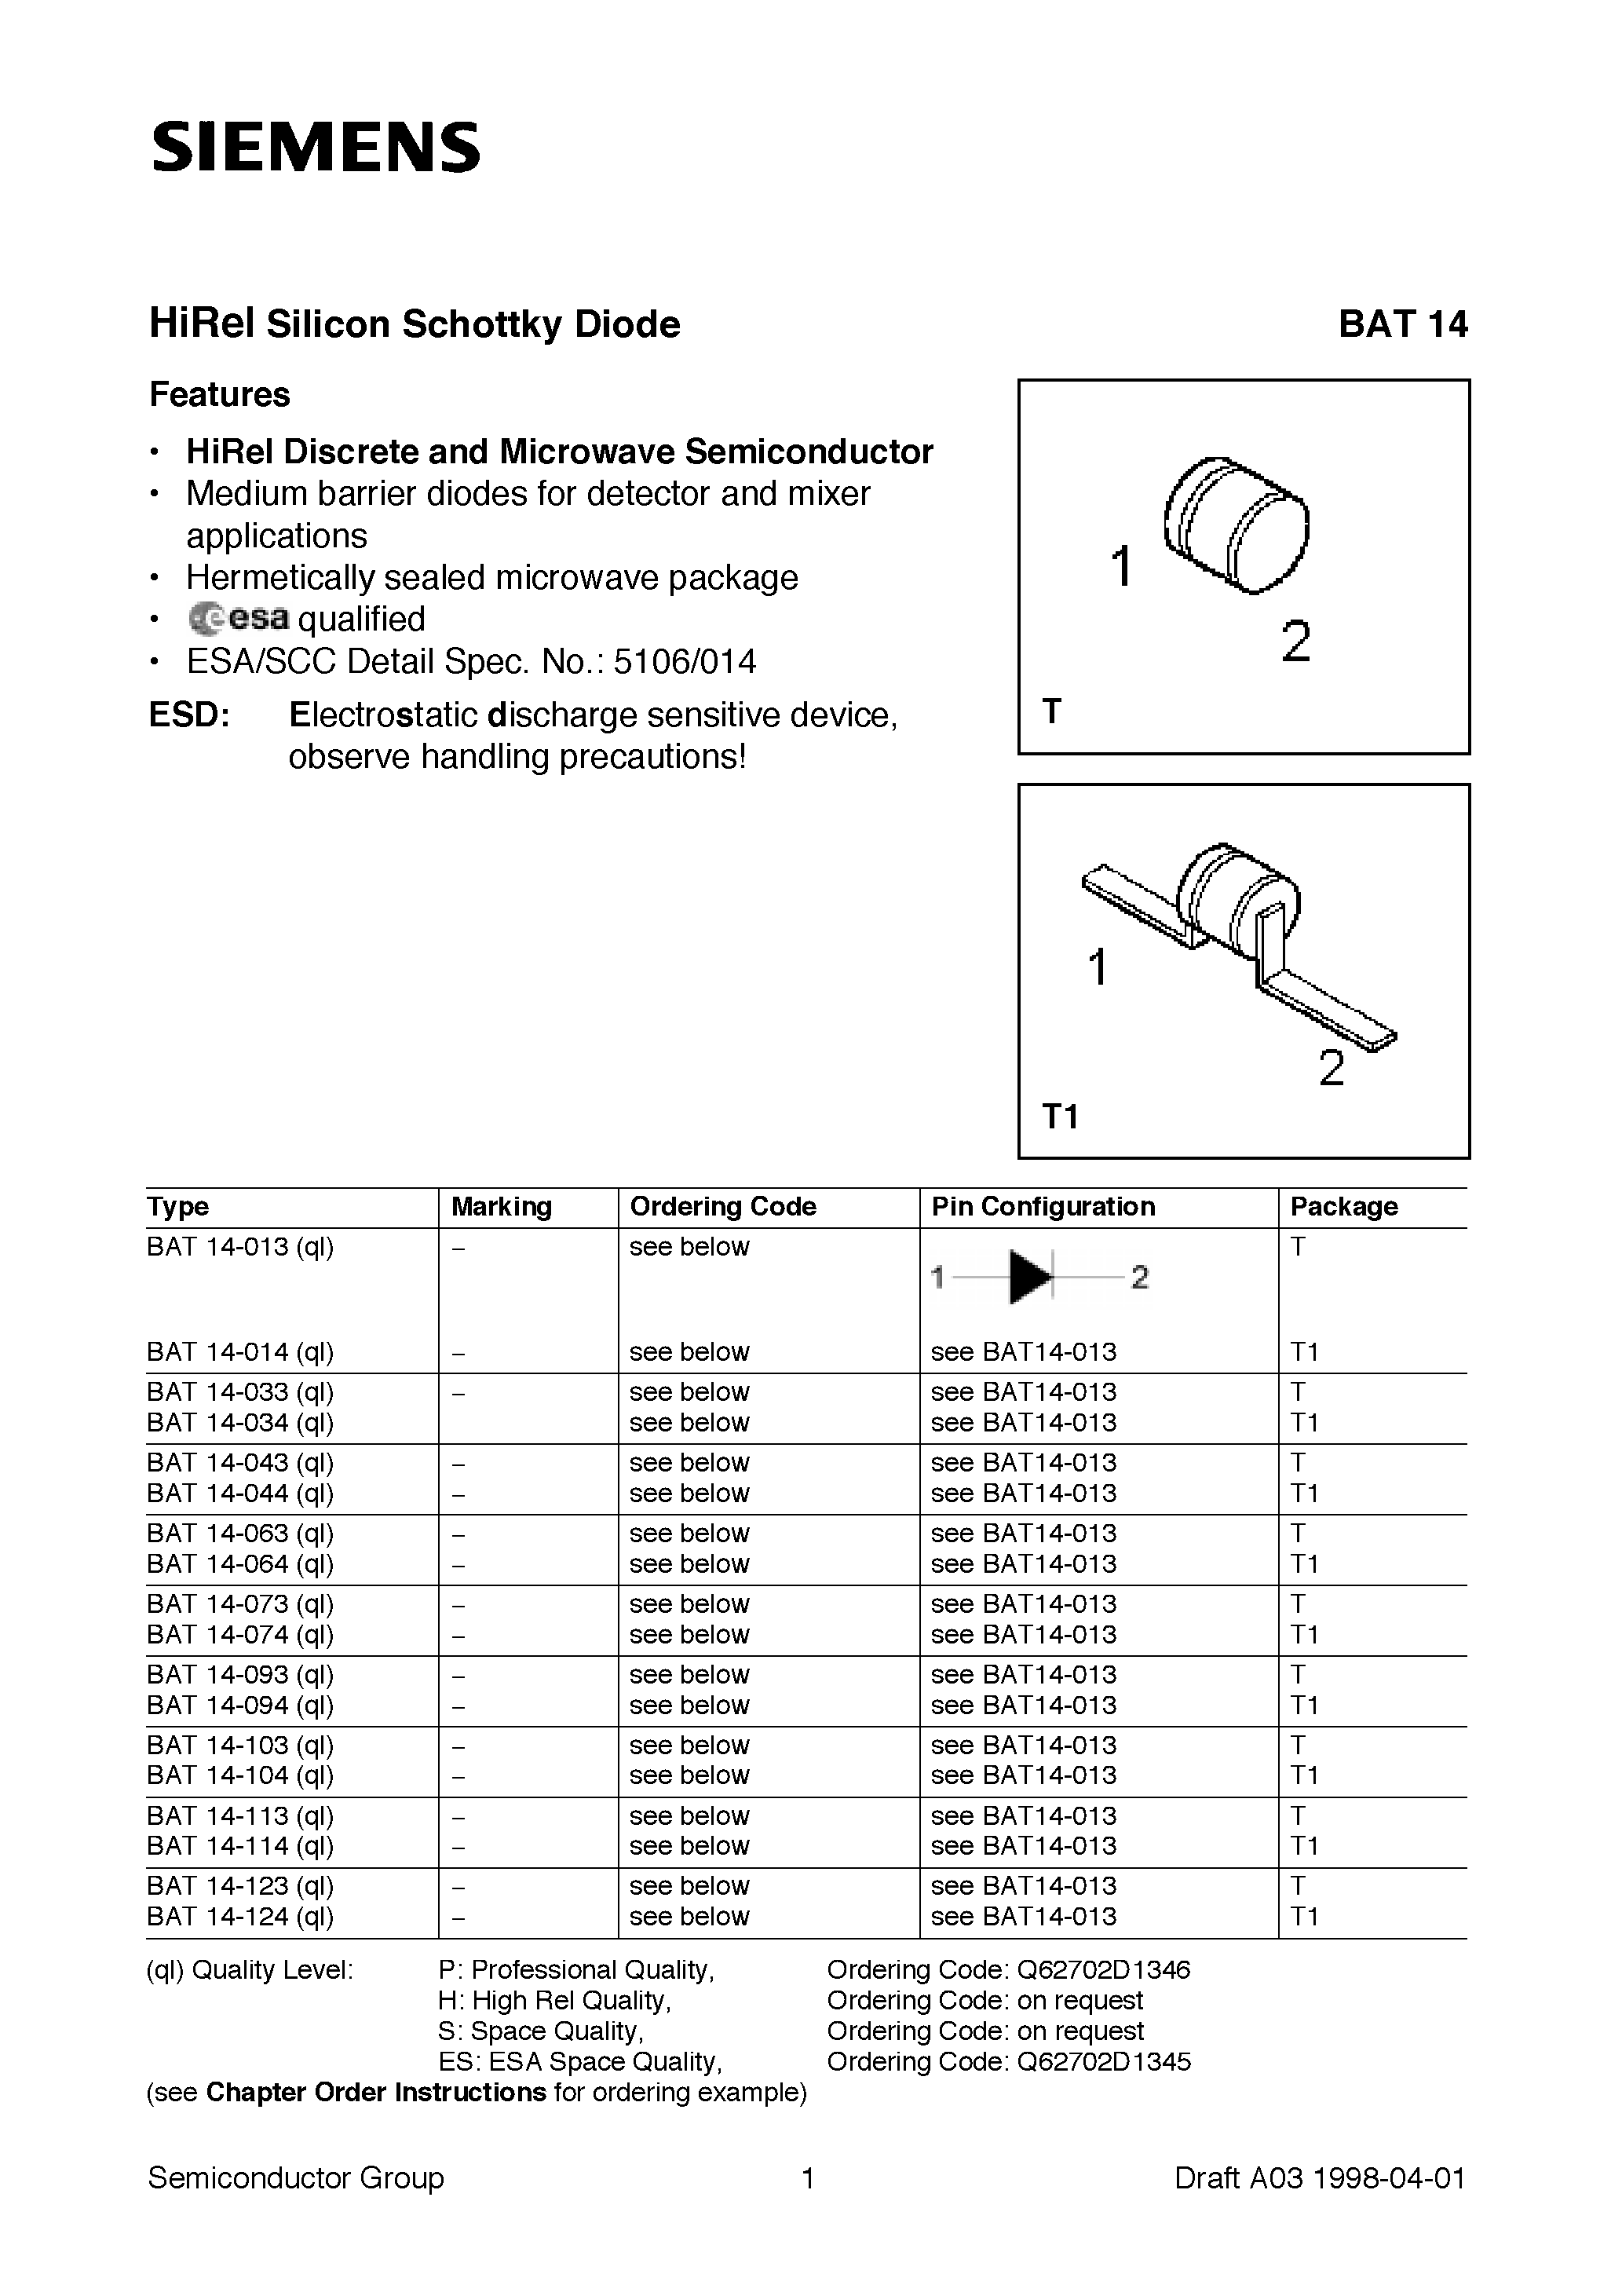 Datasheet BAT14-073 - HiRel Silicon Schottky Diode (HiRel Discrete and Microwave Semiconductor Medium barrier diodes for detector and mixer applications) page 1